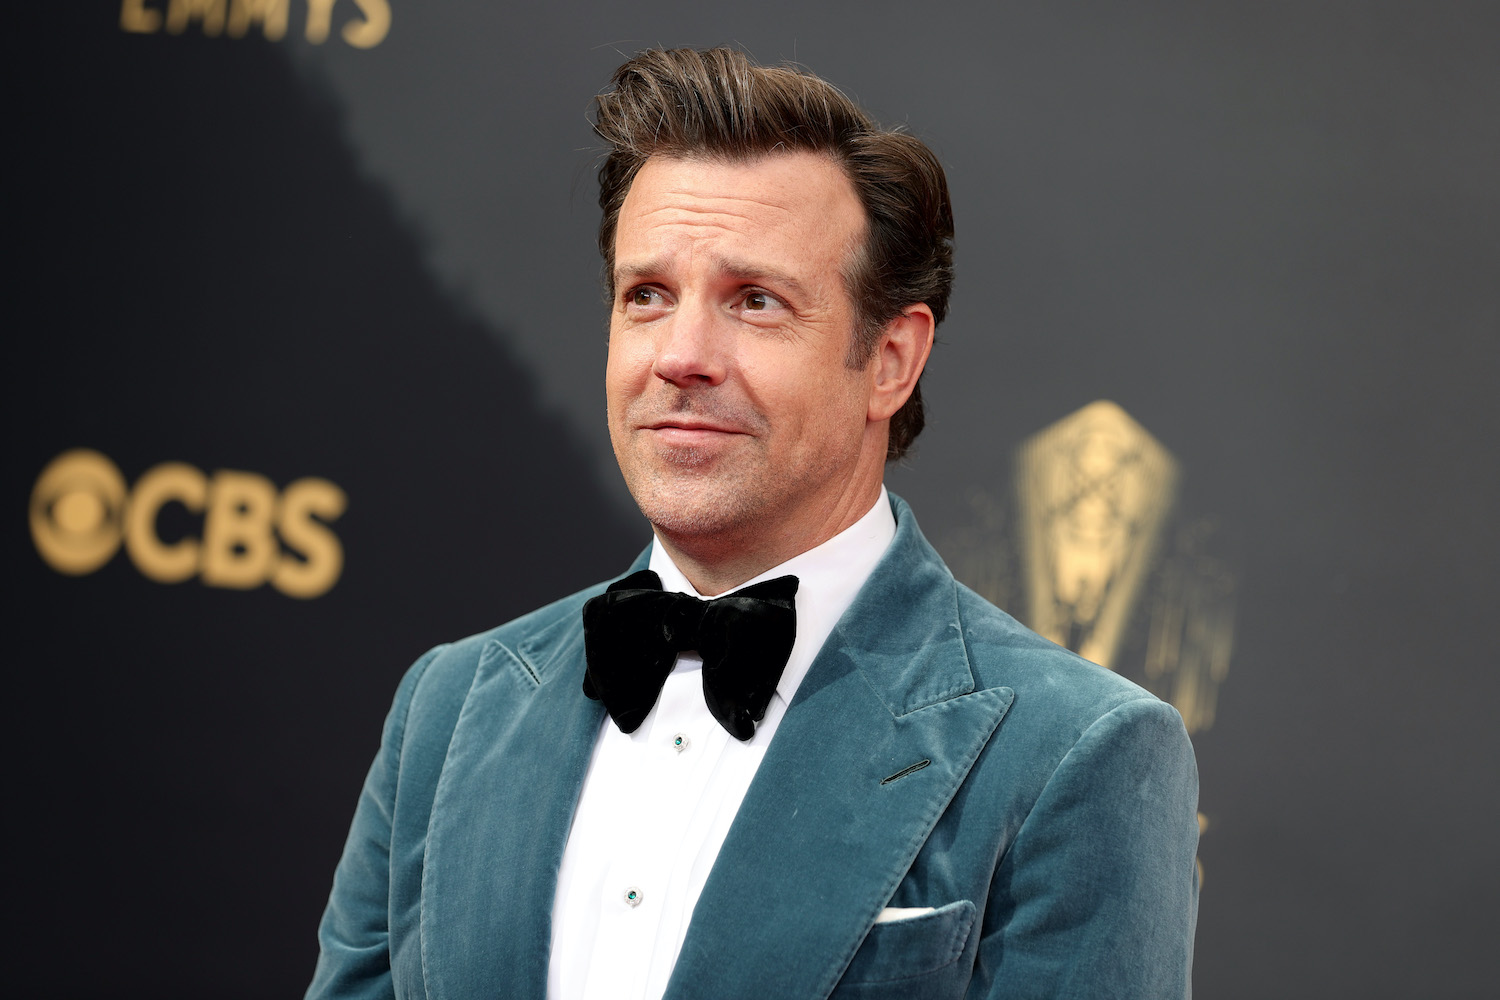 Jason Sudeikis wears a velvet suit on the 2021 Emmys red carpet.